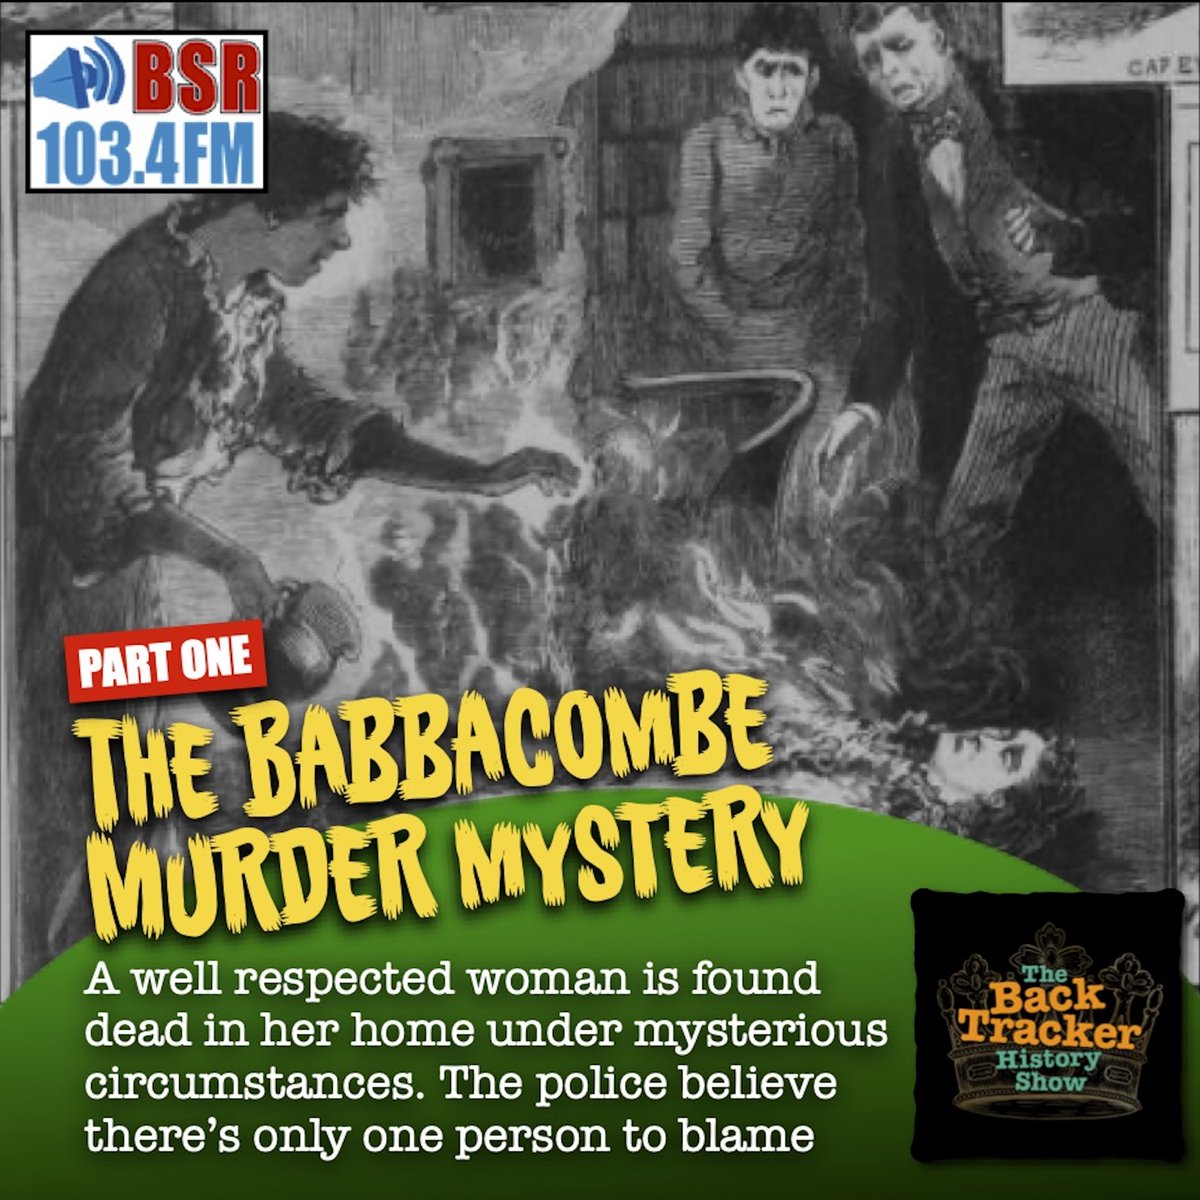 NEW EPISODE: On the night of 14th Nov 1884, the cook woke up to the smell of smoke & went to wake the others, but owner, Miss Keyse room, was ablaze, and she wasn't in bed. What happened next horrified the country. Listen to Part one of this amazing story. player.captivate.fm/episode/0df2a5…